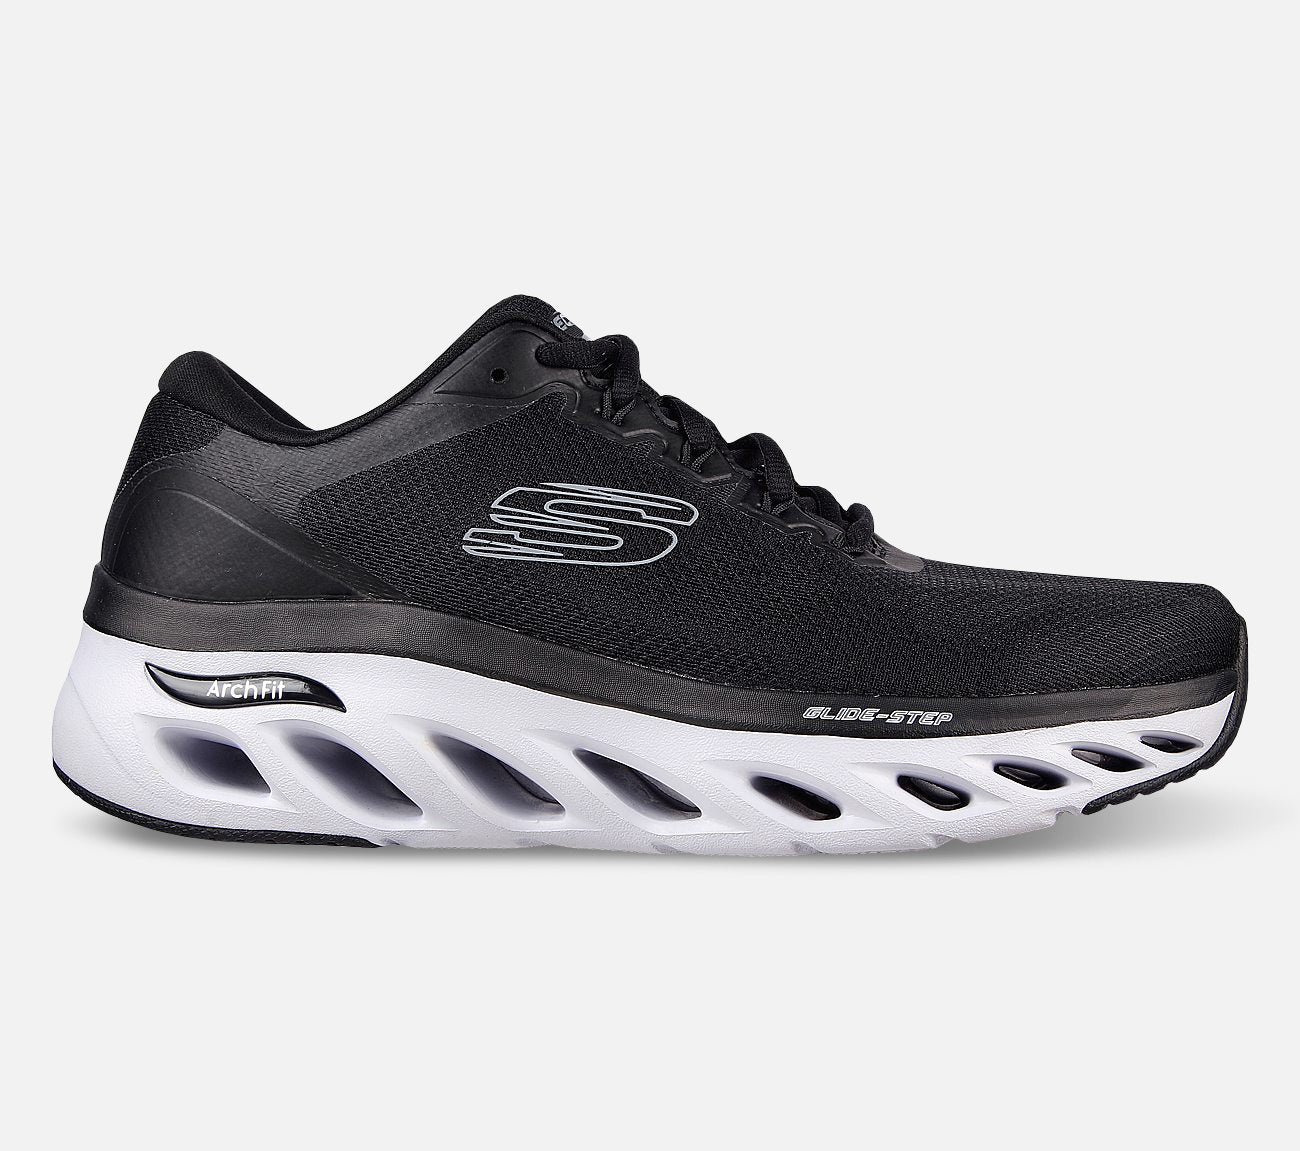 Arch Fit Glide-Step - Highlighter Shoe Skechers